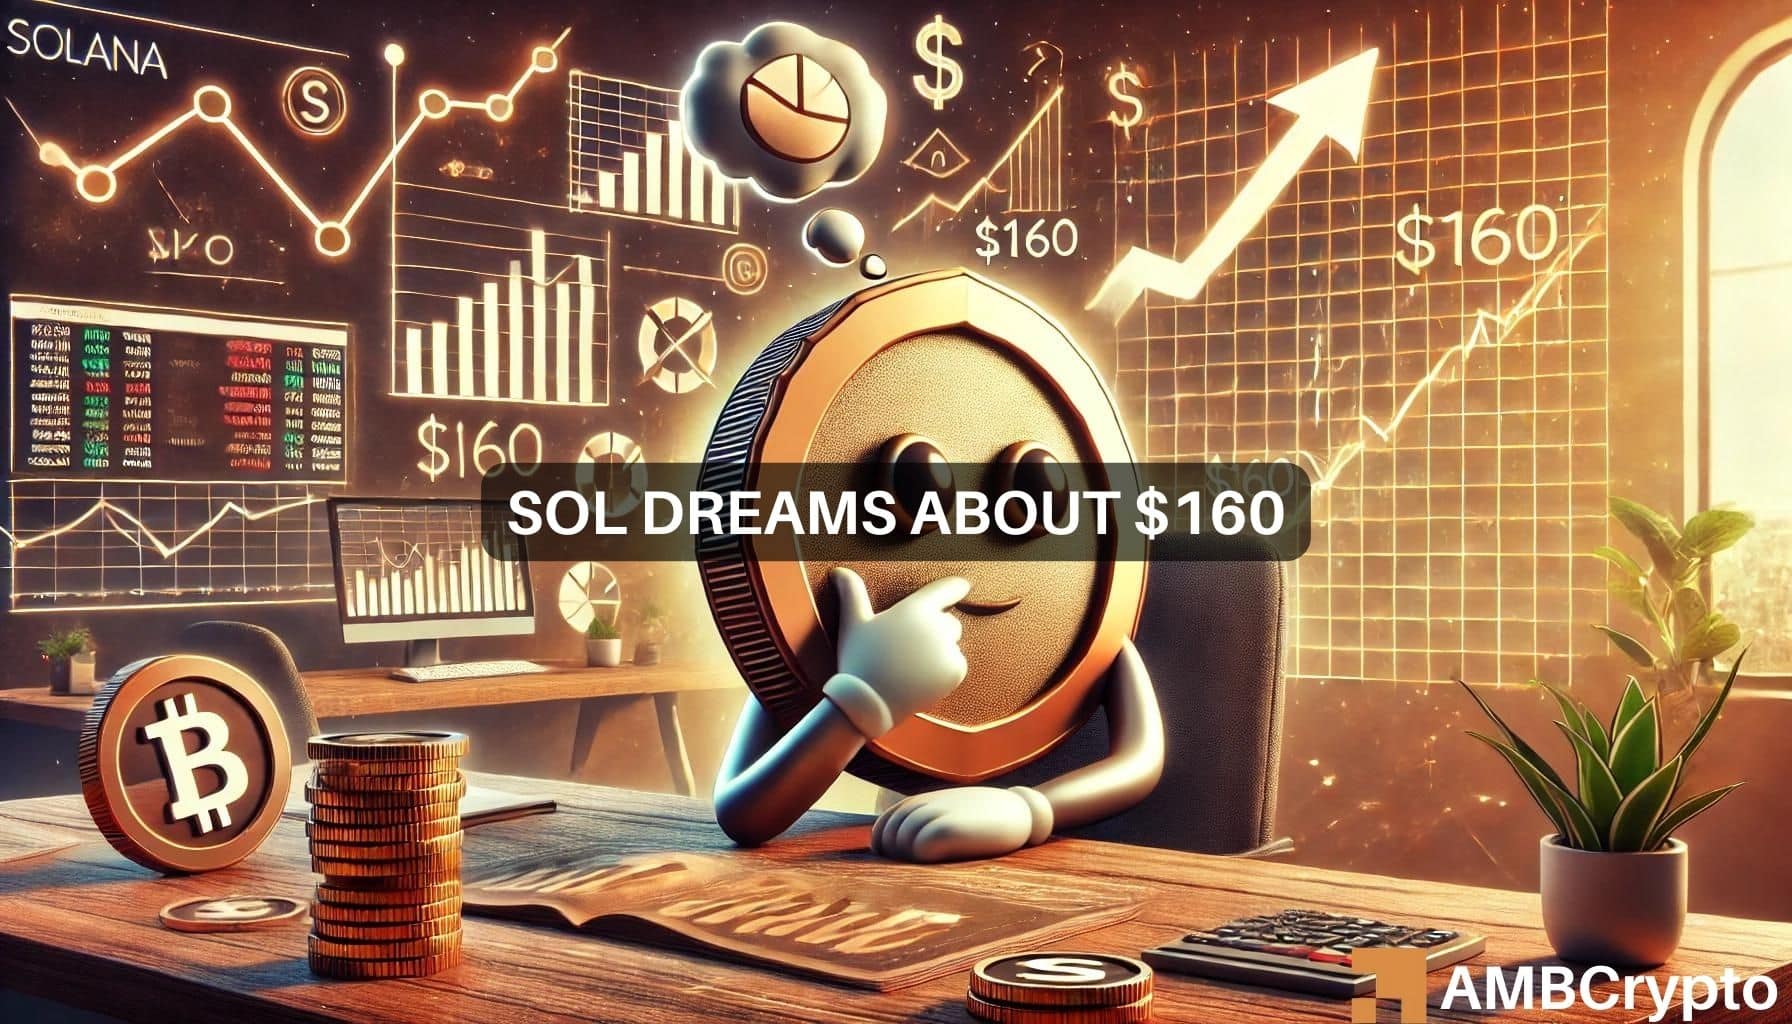 Will Solana hit $160 in July? Some interesting patterns emerge